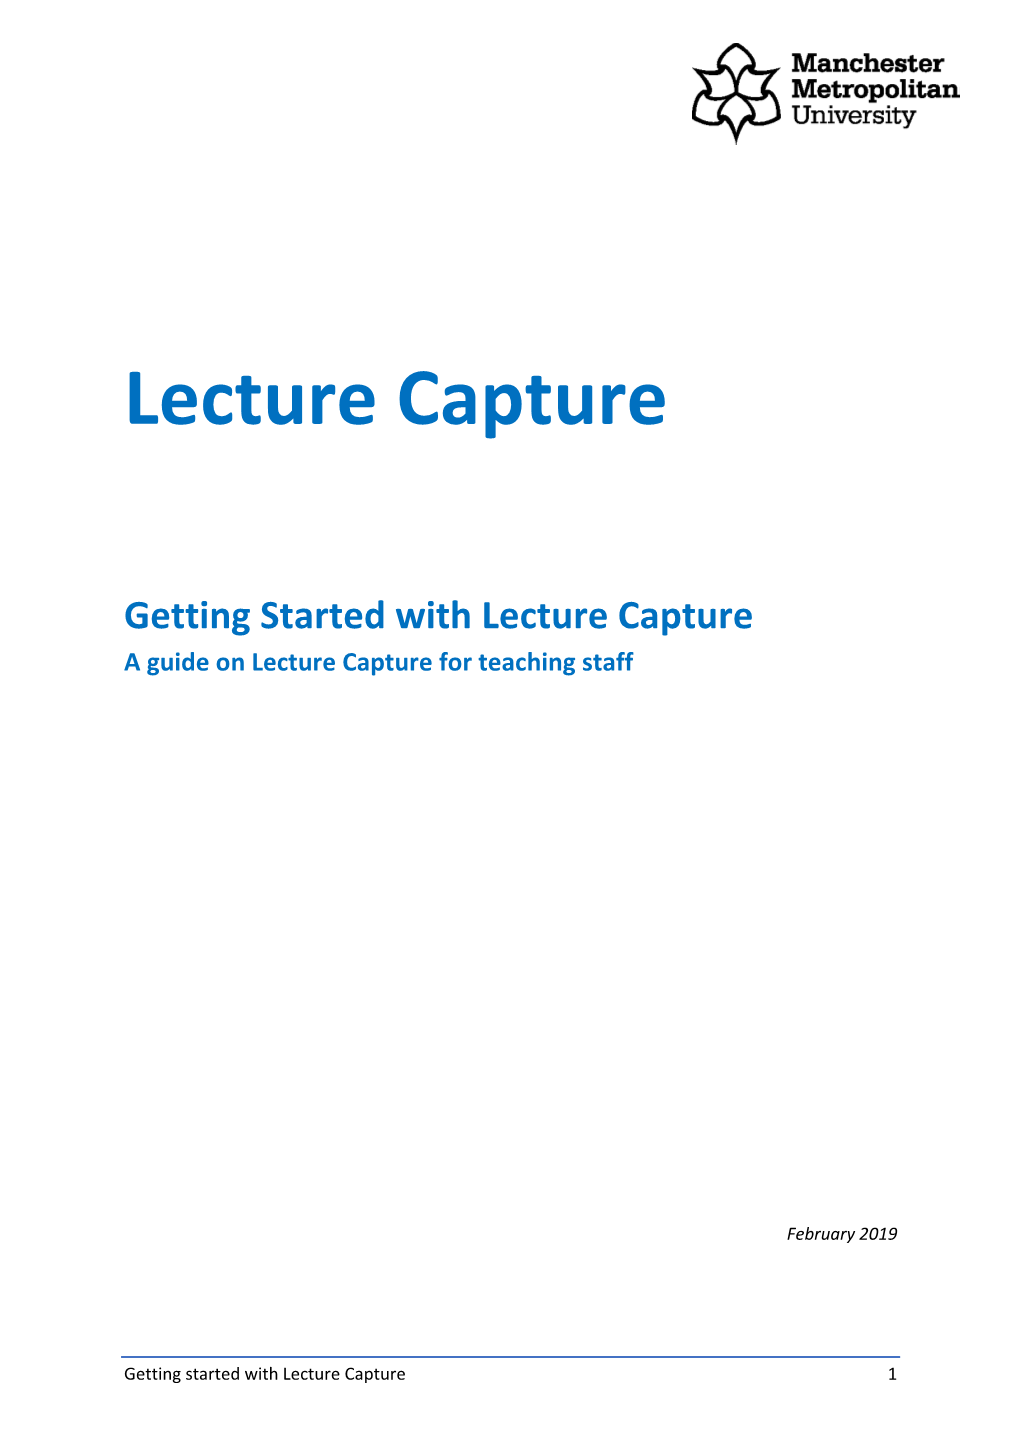 Getting Started with Lecture Capture a Guide on Lecture Capture for Teaching Staff